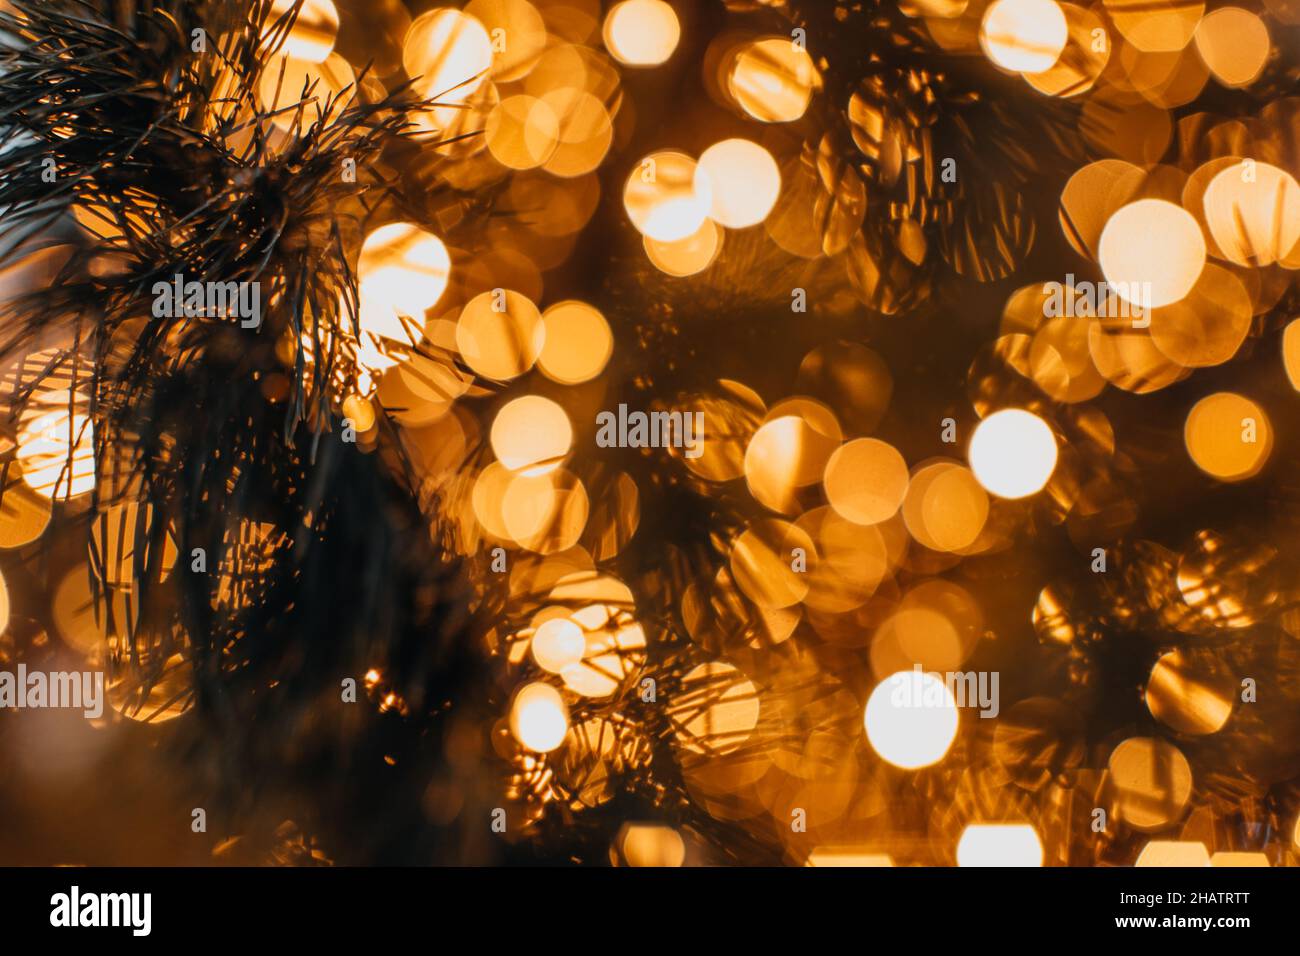 Golden magic glittering blurry bokeh lights of garland. Christmas and New Year festive background Stock Photo